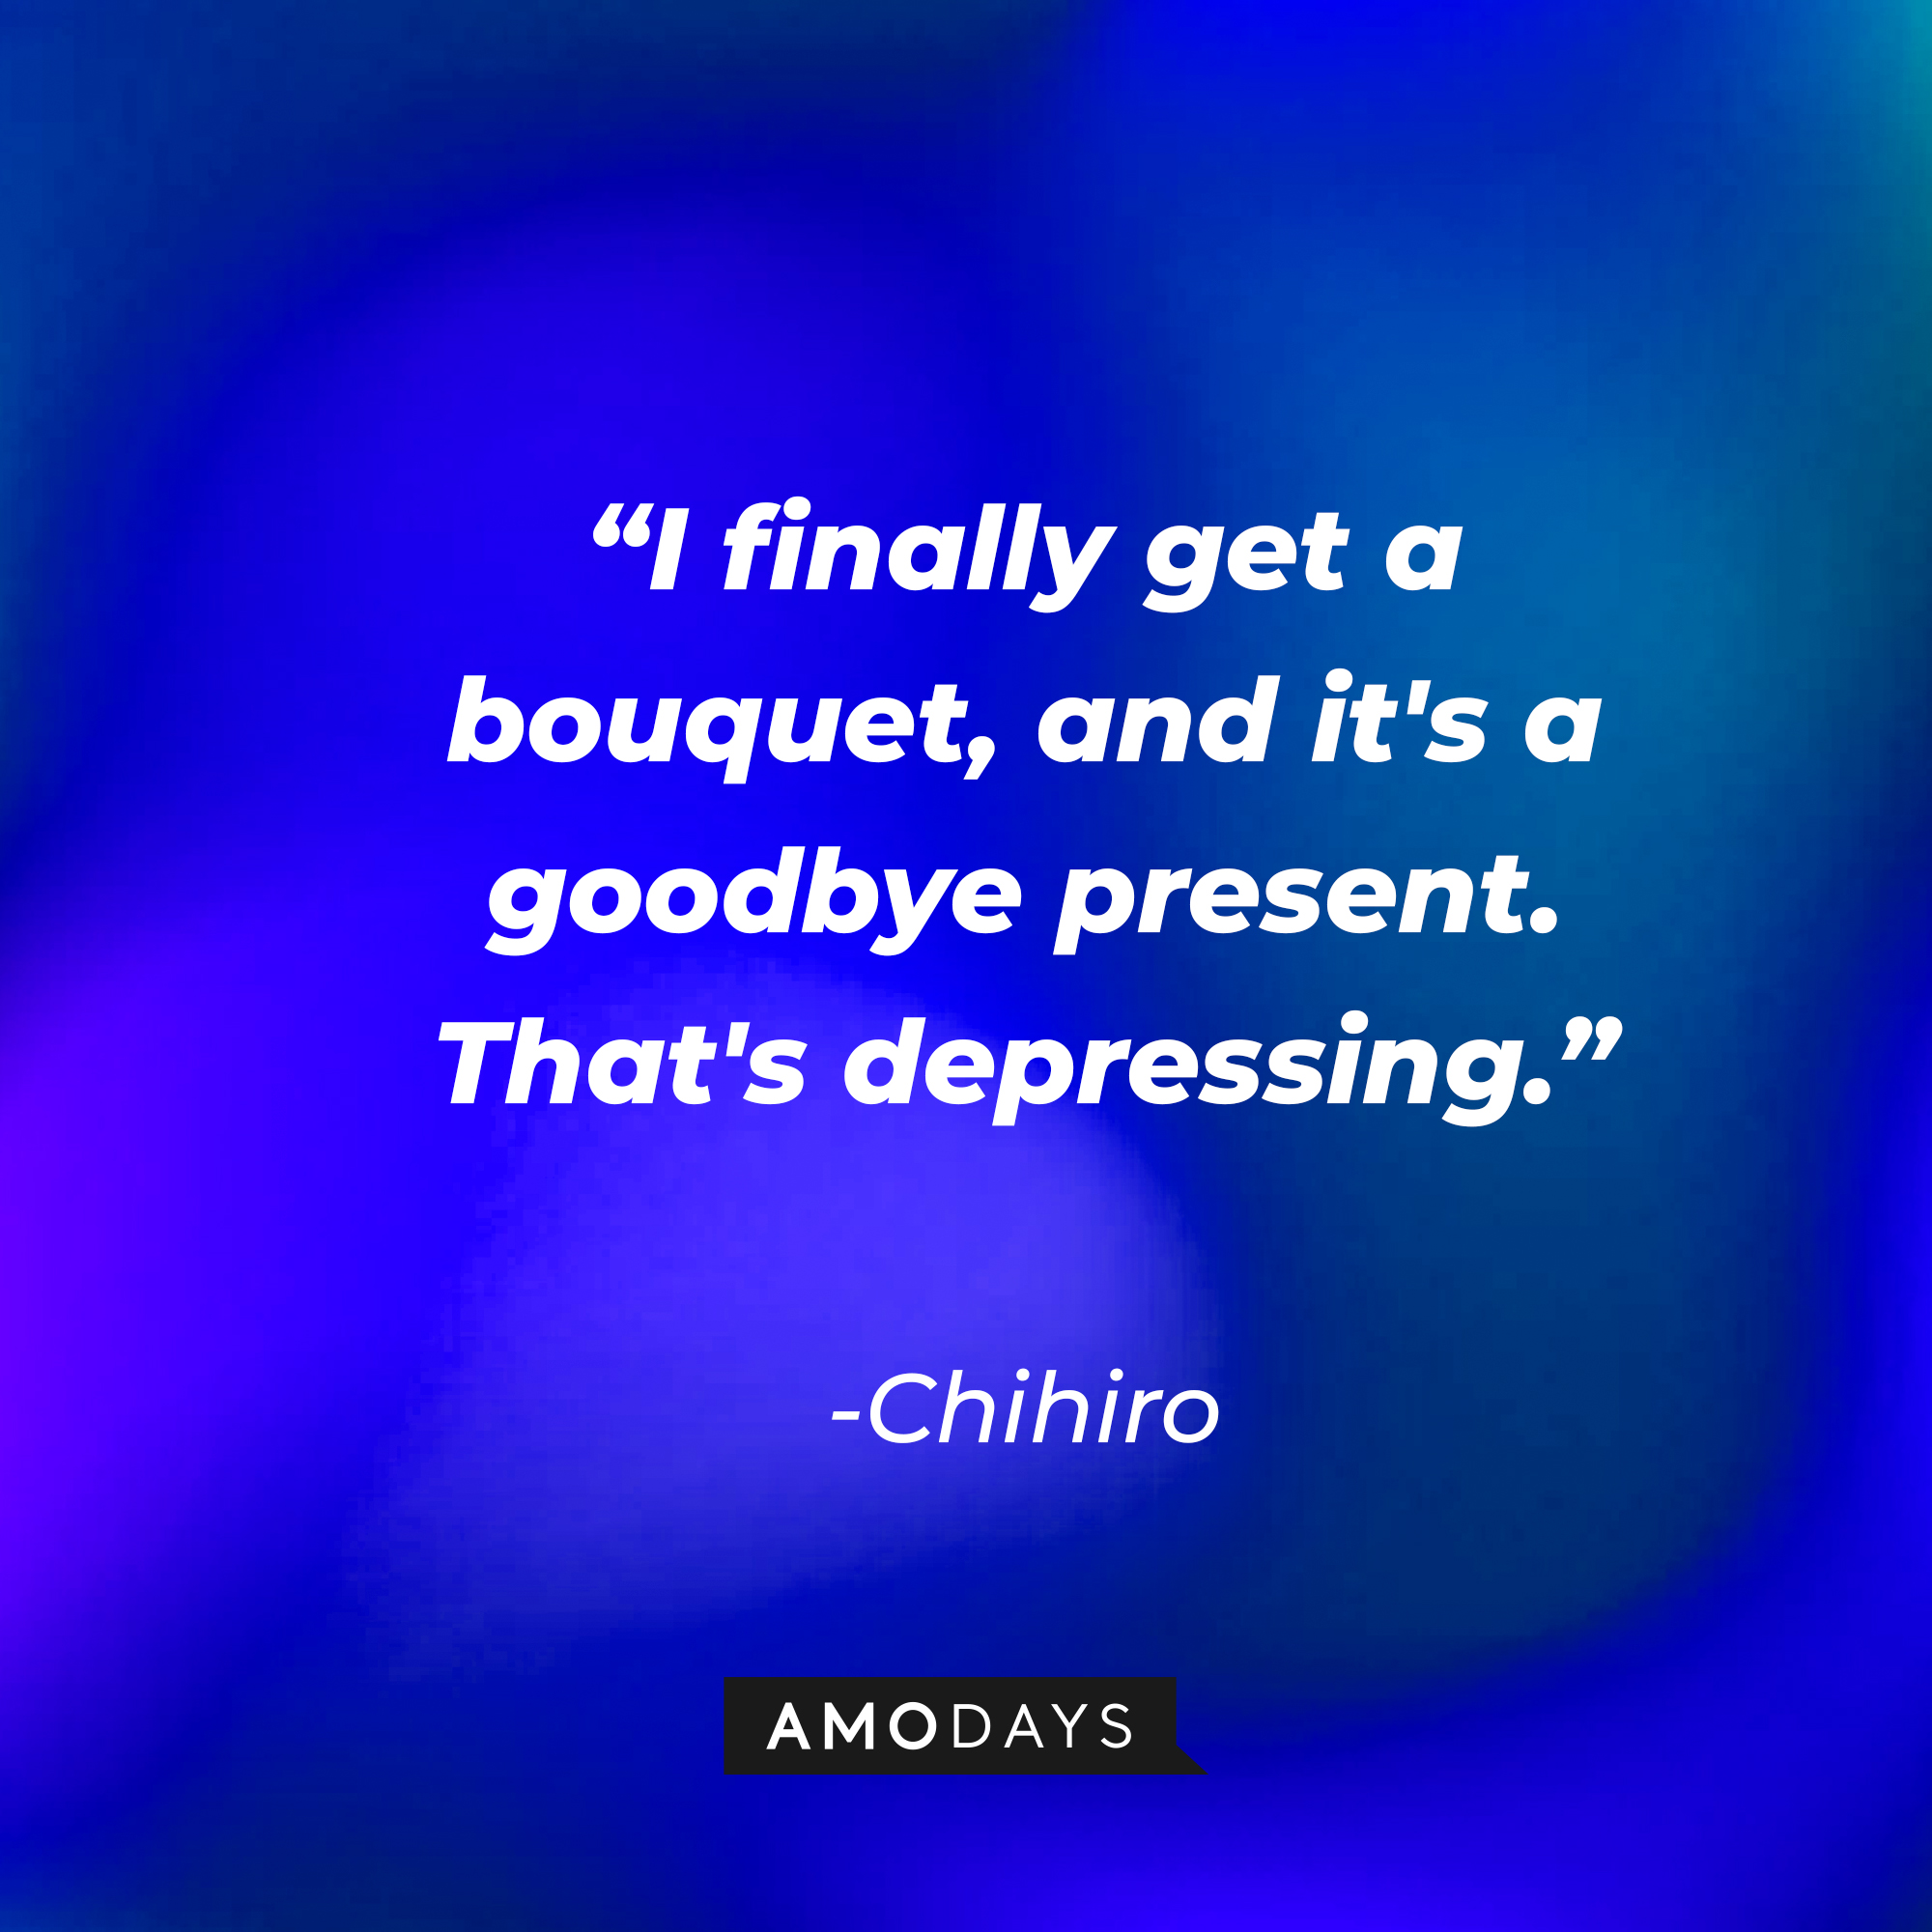 Chihiro’s quote: "I finally get a bouquet, and it's a goodbye present. That's depressing.” | Source: AmoDays